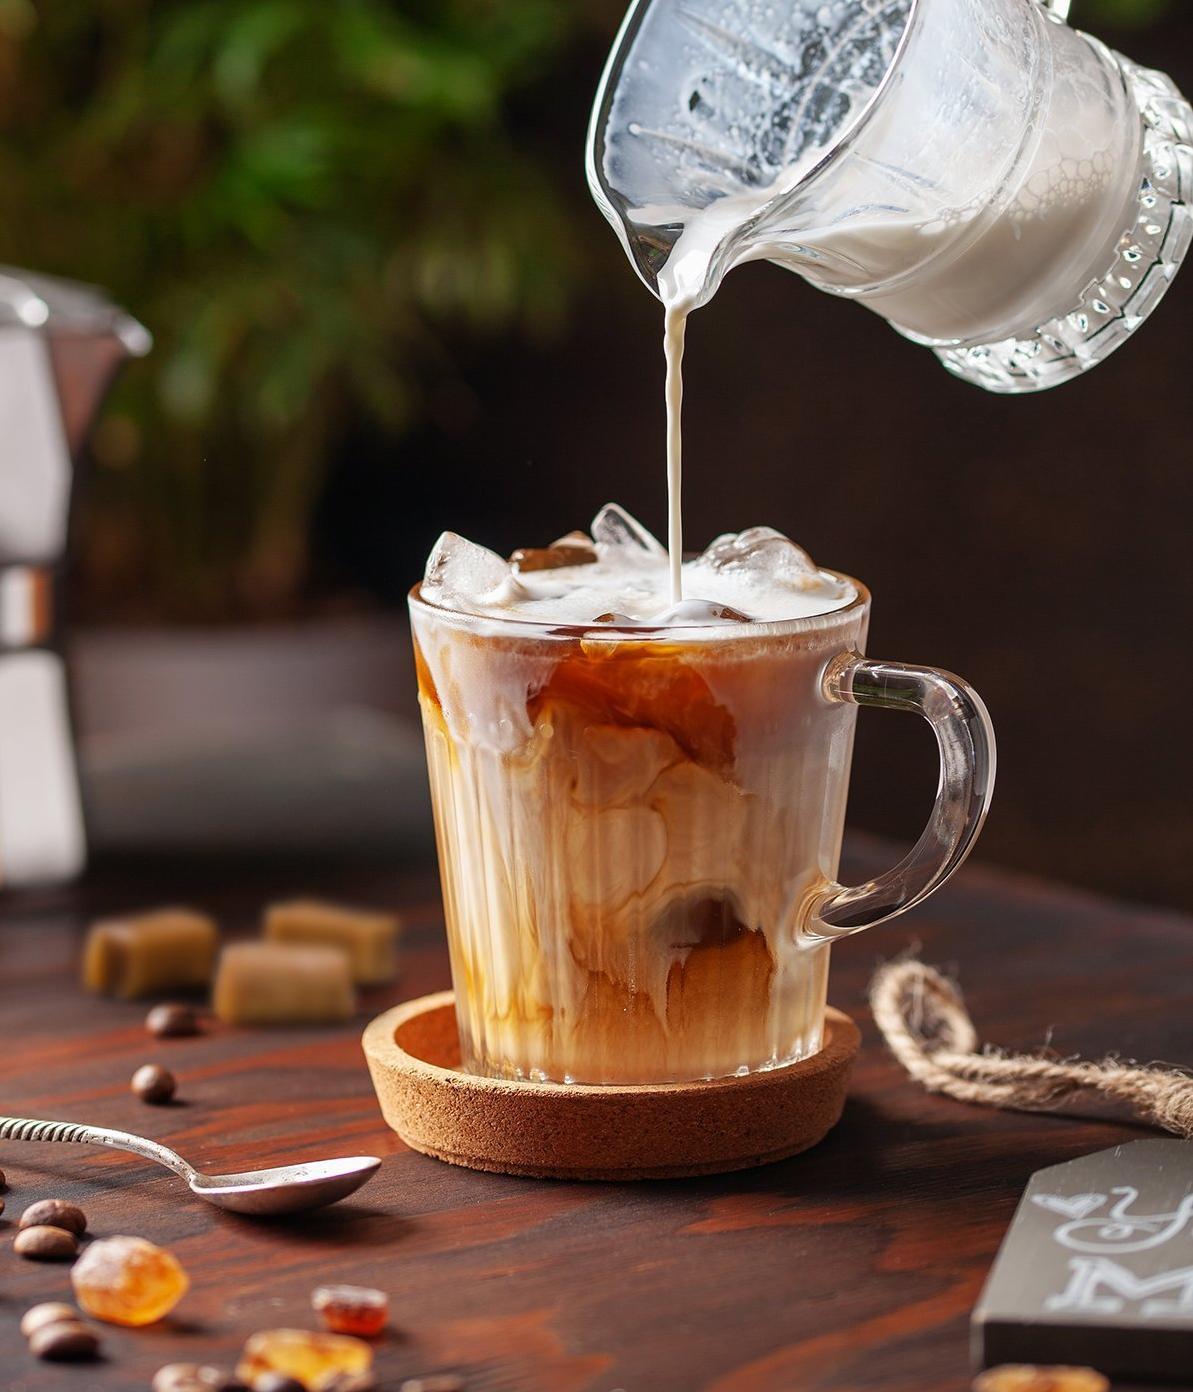  If you like your coffee with a nutty and sweet twist, this one's for you!